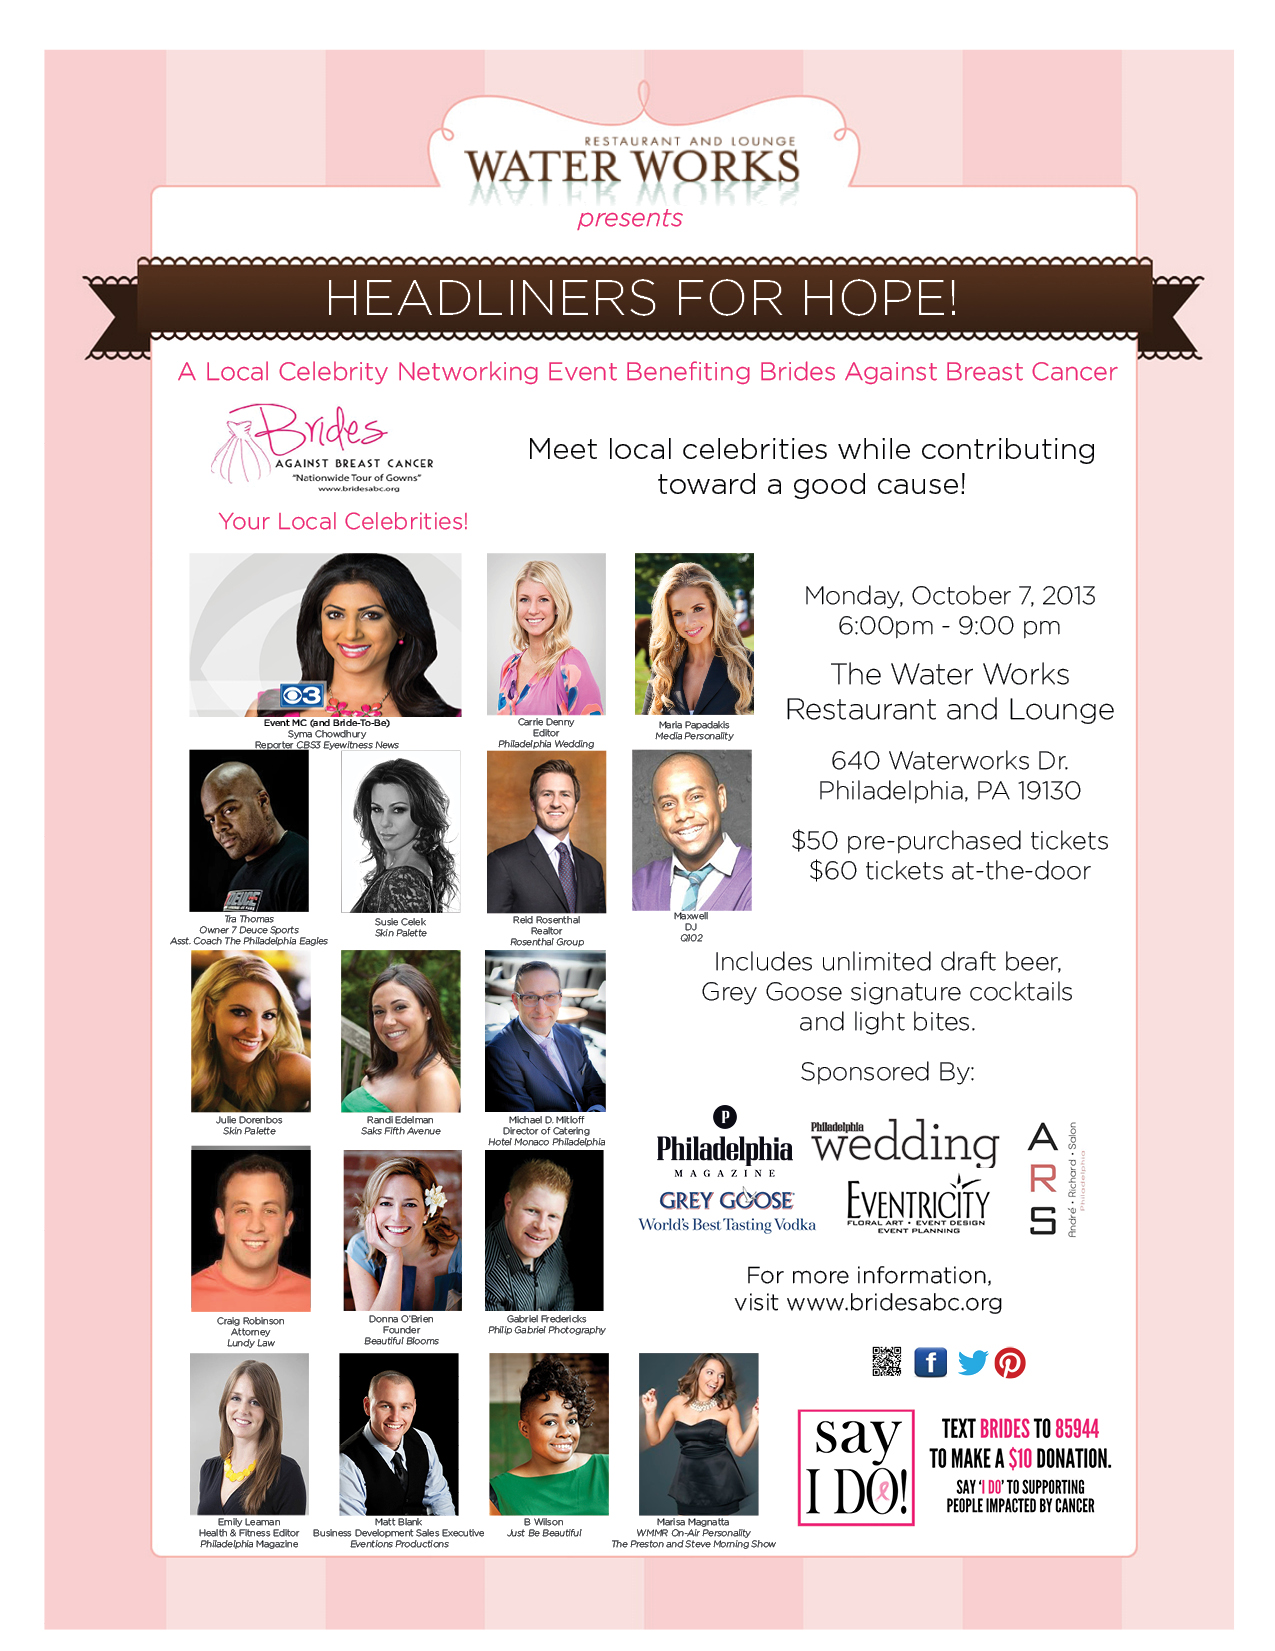 Come Out With Philadelphia Wedding and Brides Against Breast Cancer! 